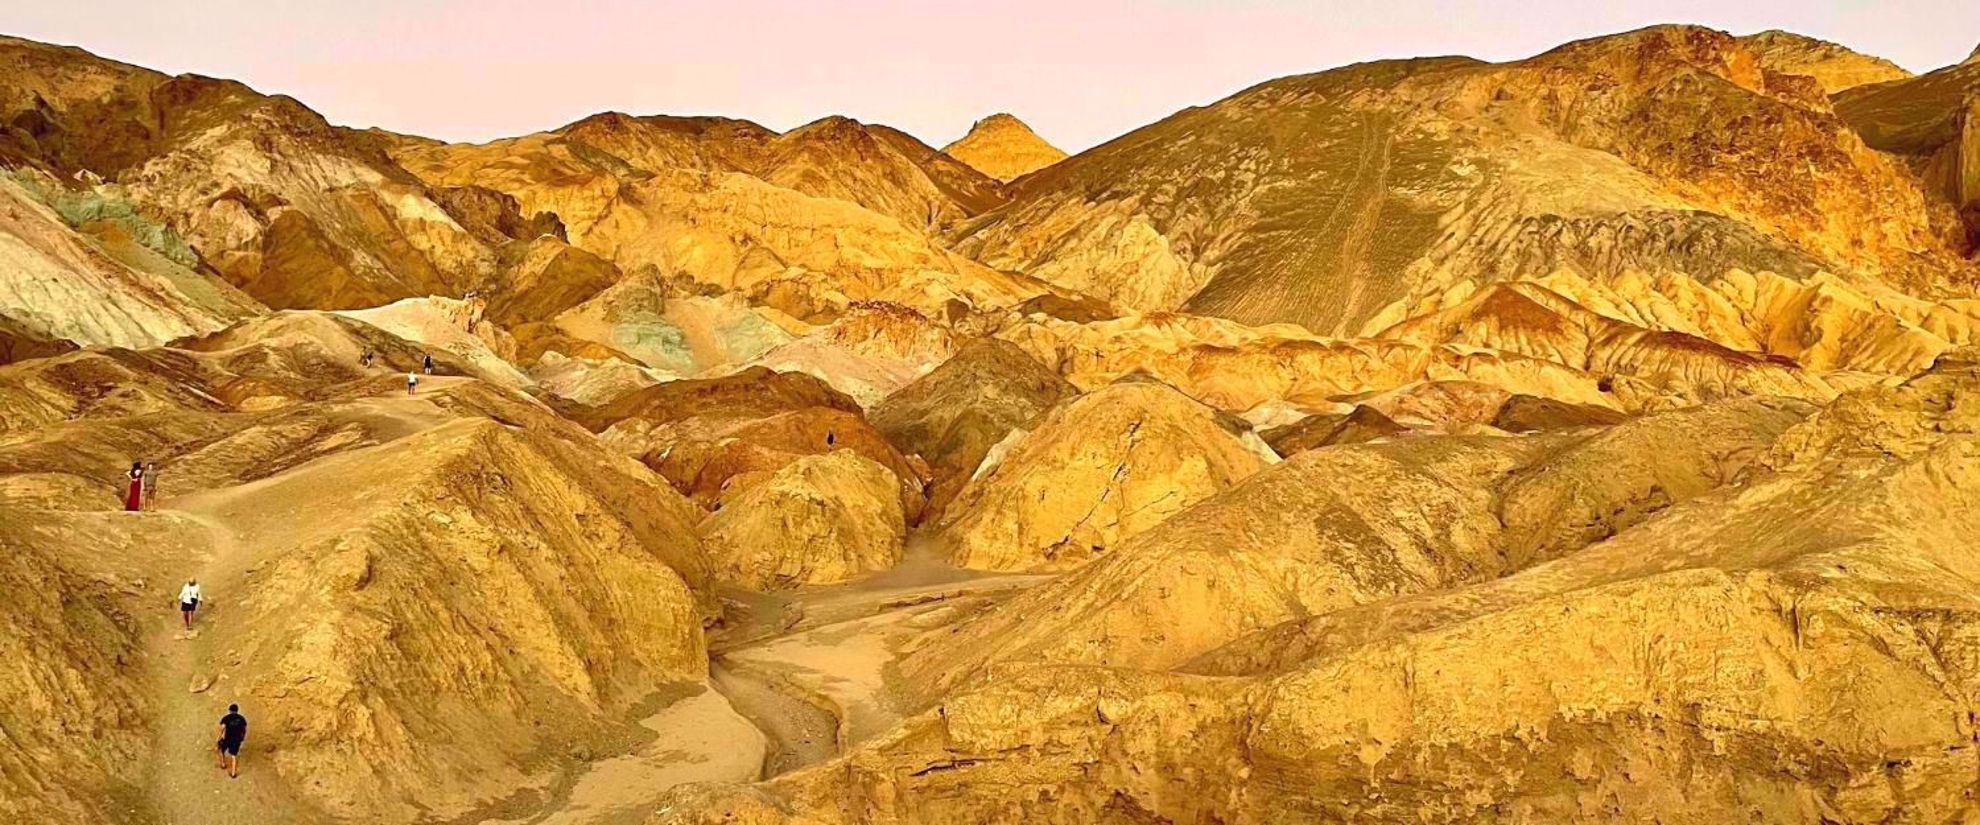 marvelous colors of the desert in death valley